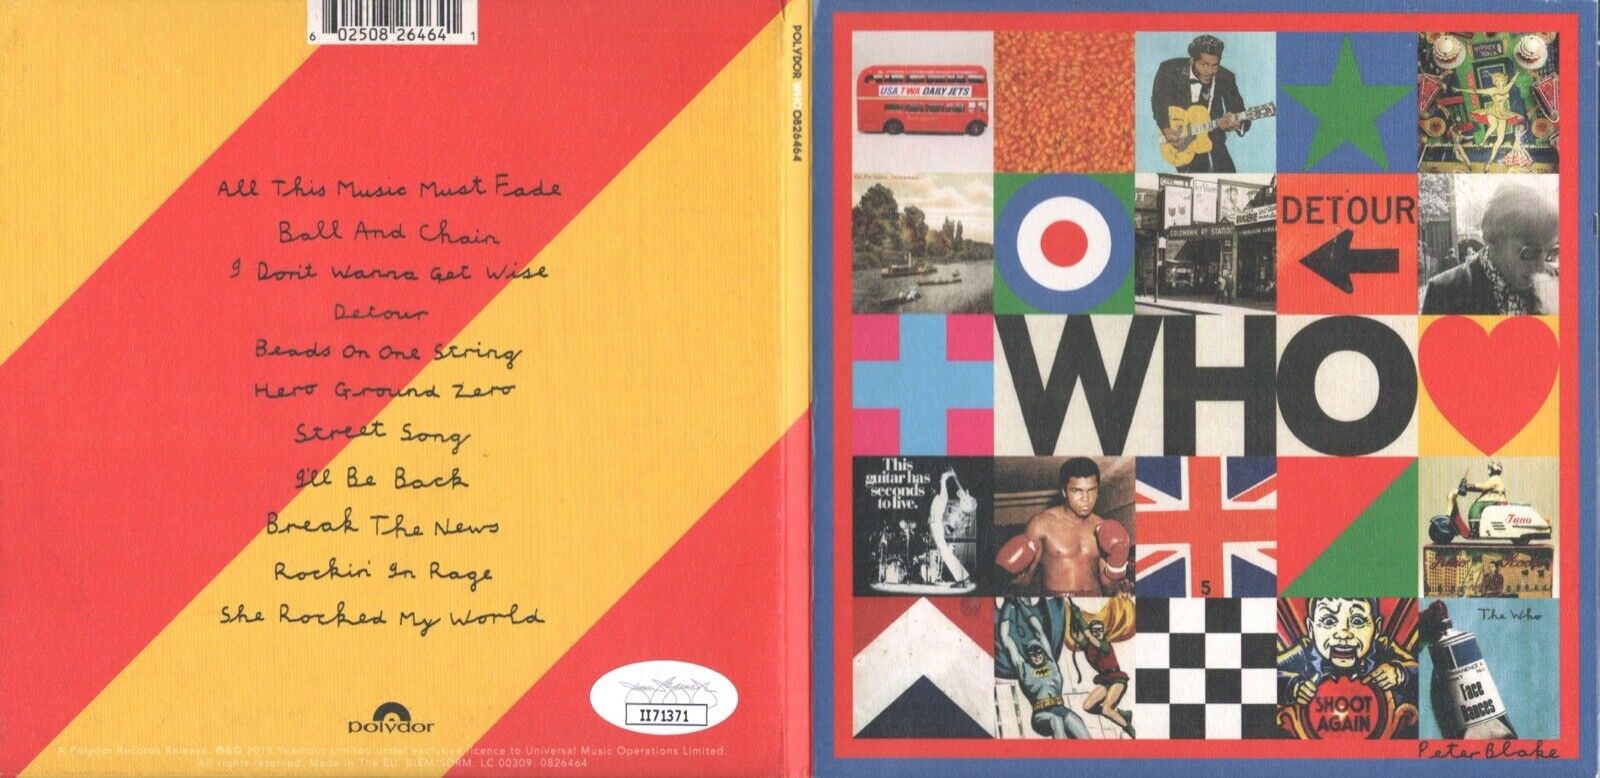 PETE TOWNSHEND The Who Signed CD In Person Autograph JSA COA Cert